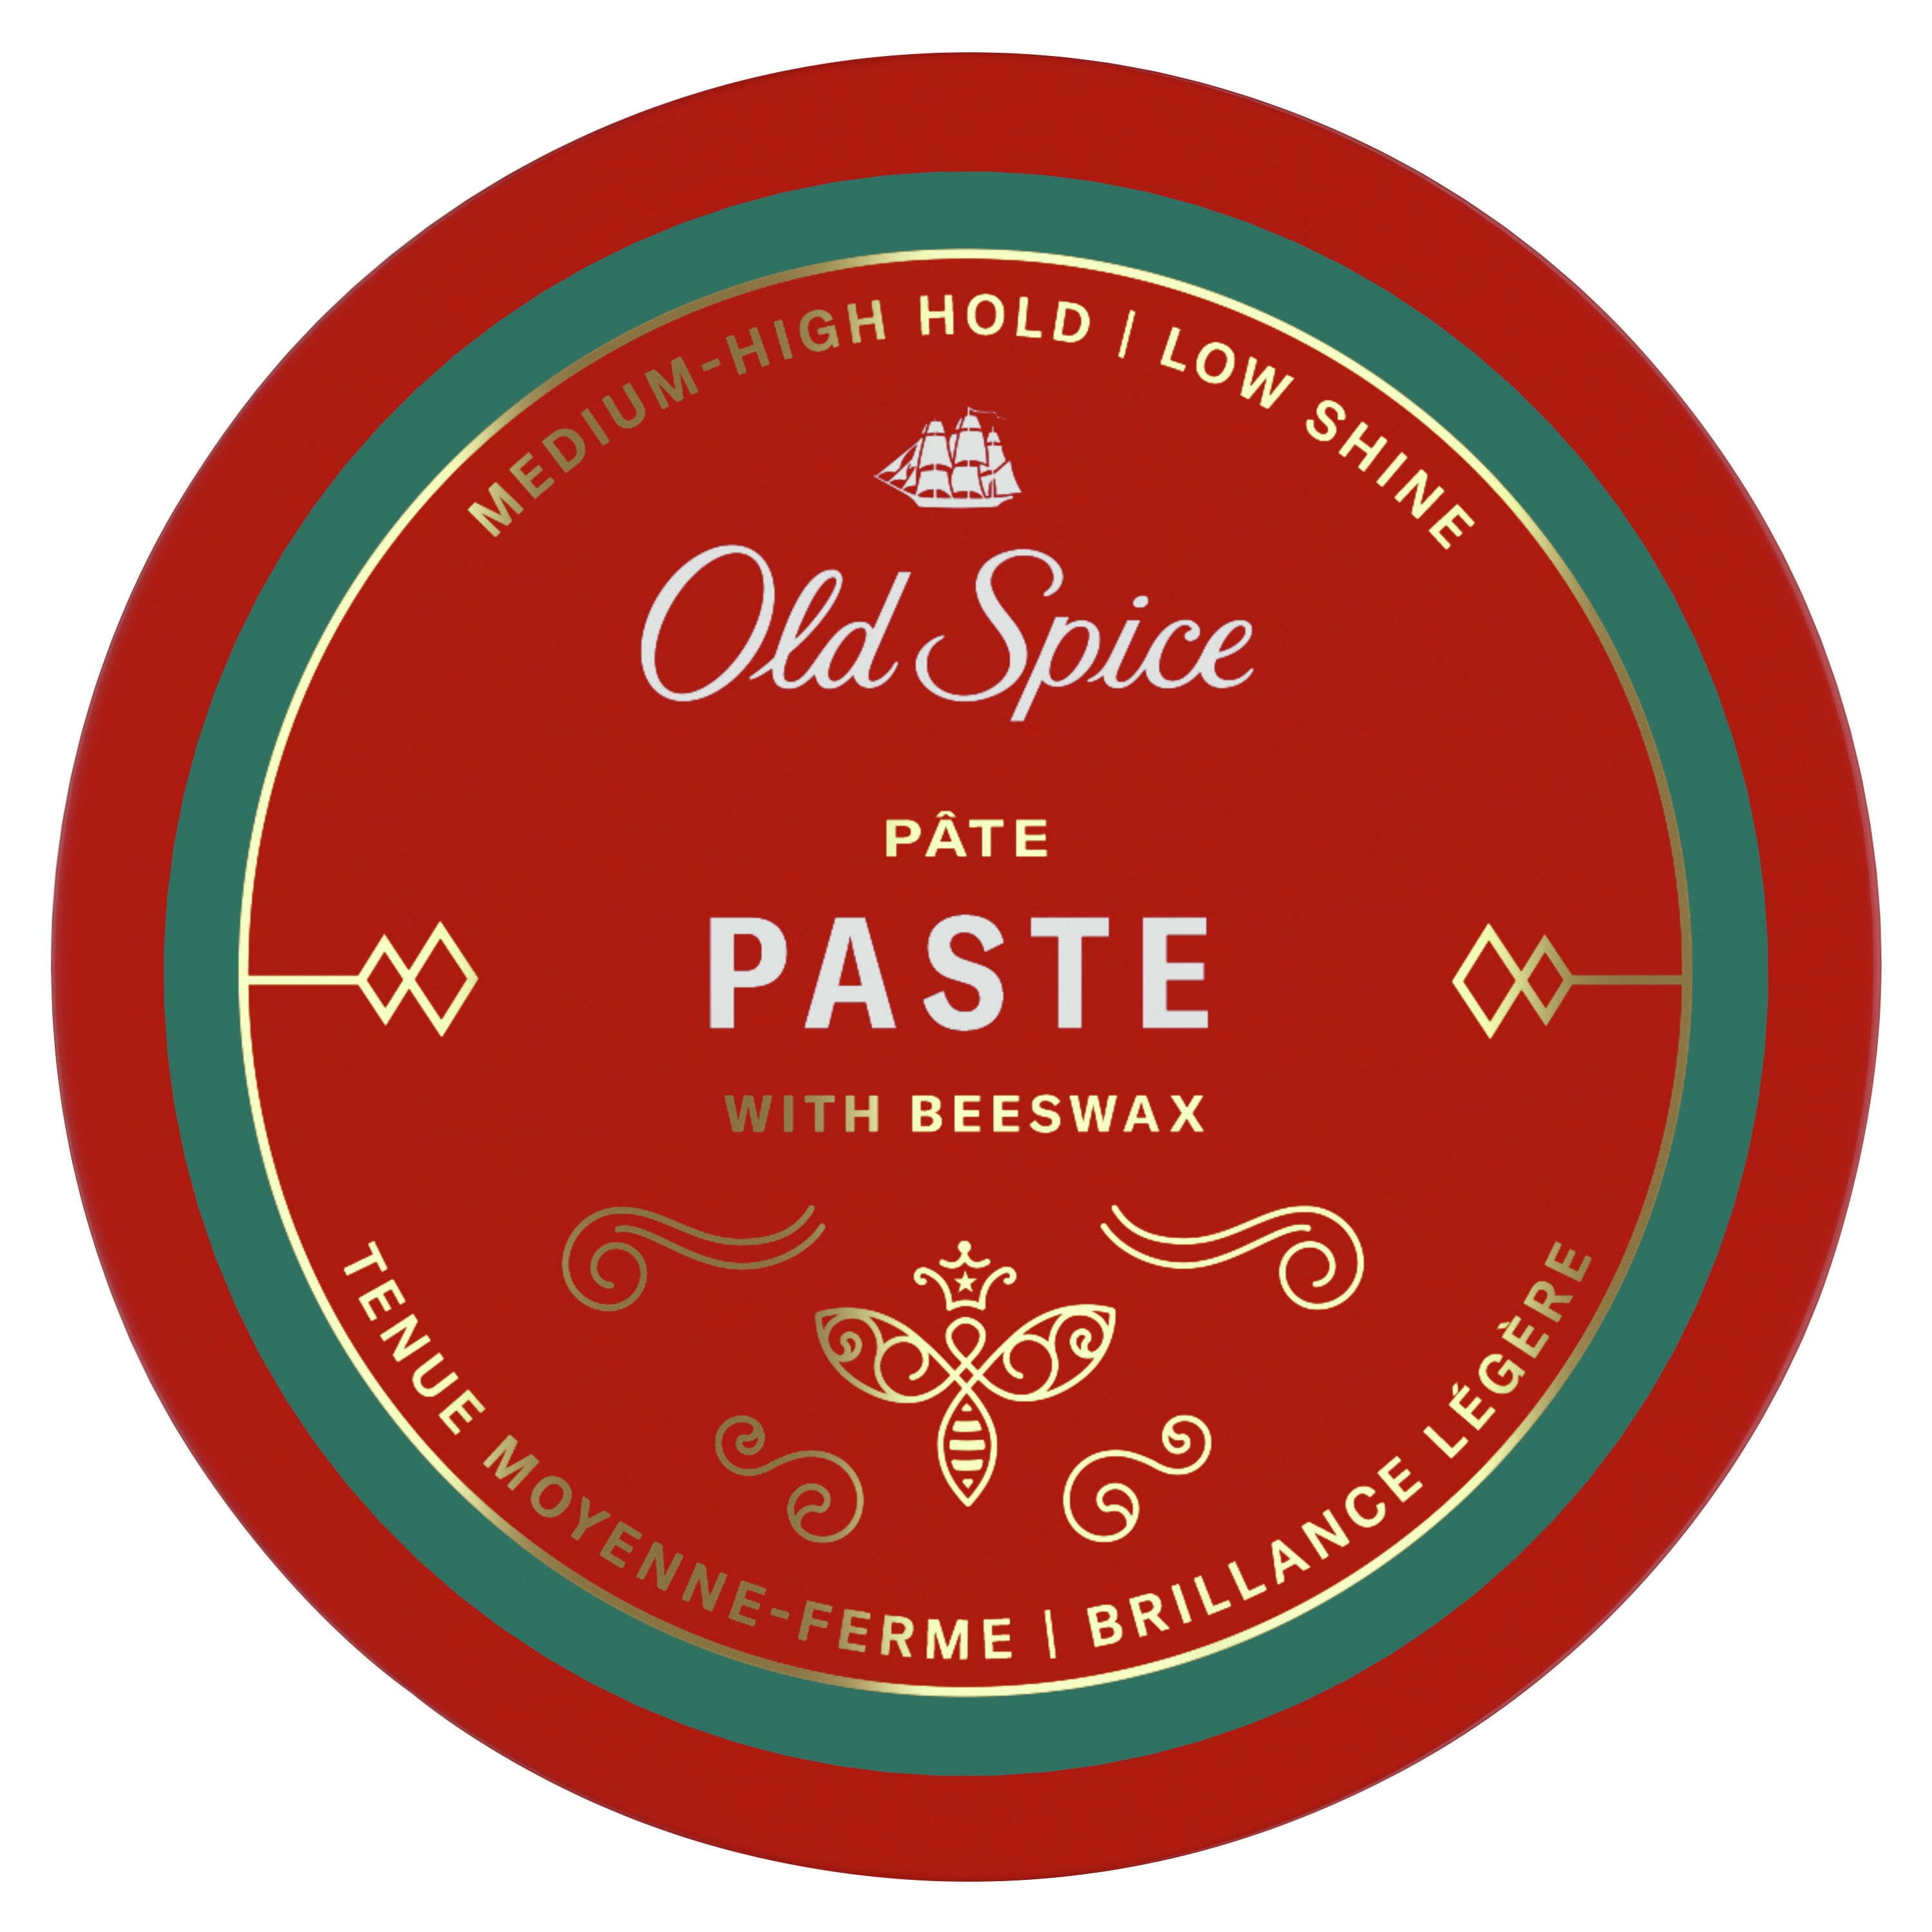 Old Spice Hair Styling Paste for Men, Medium to High Hold,  oz -  